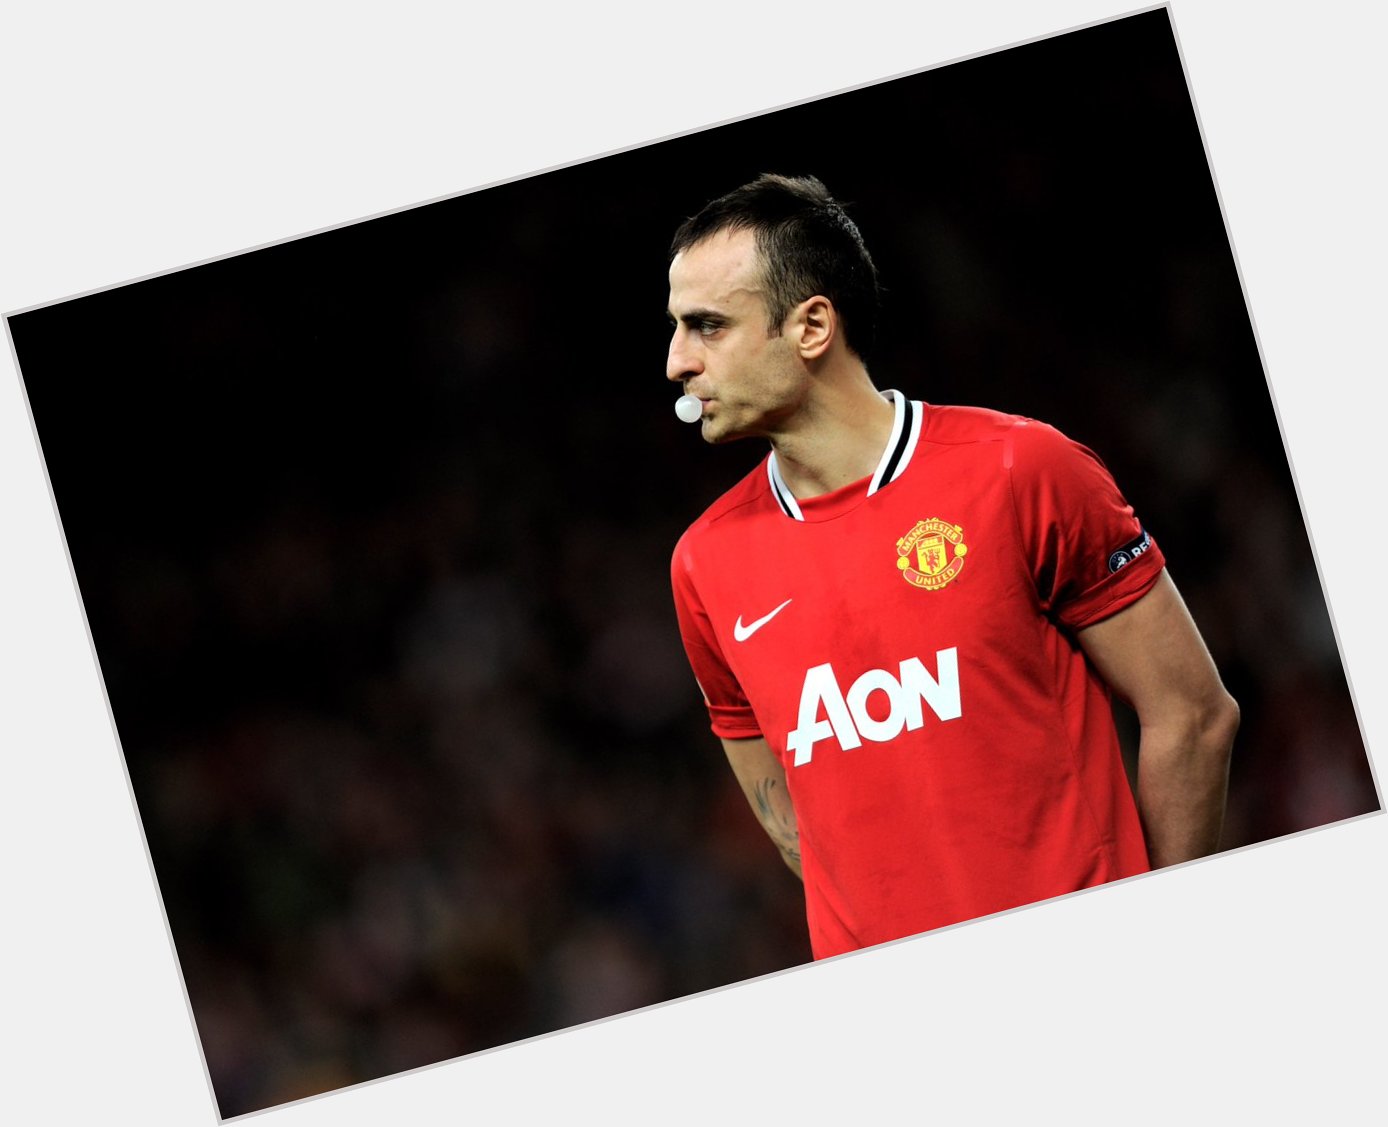 Happy birthday to former player Dimitar Berbatov!
Have A Great Day 